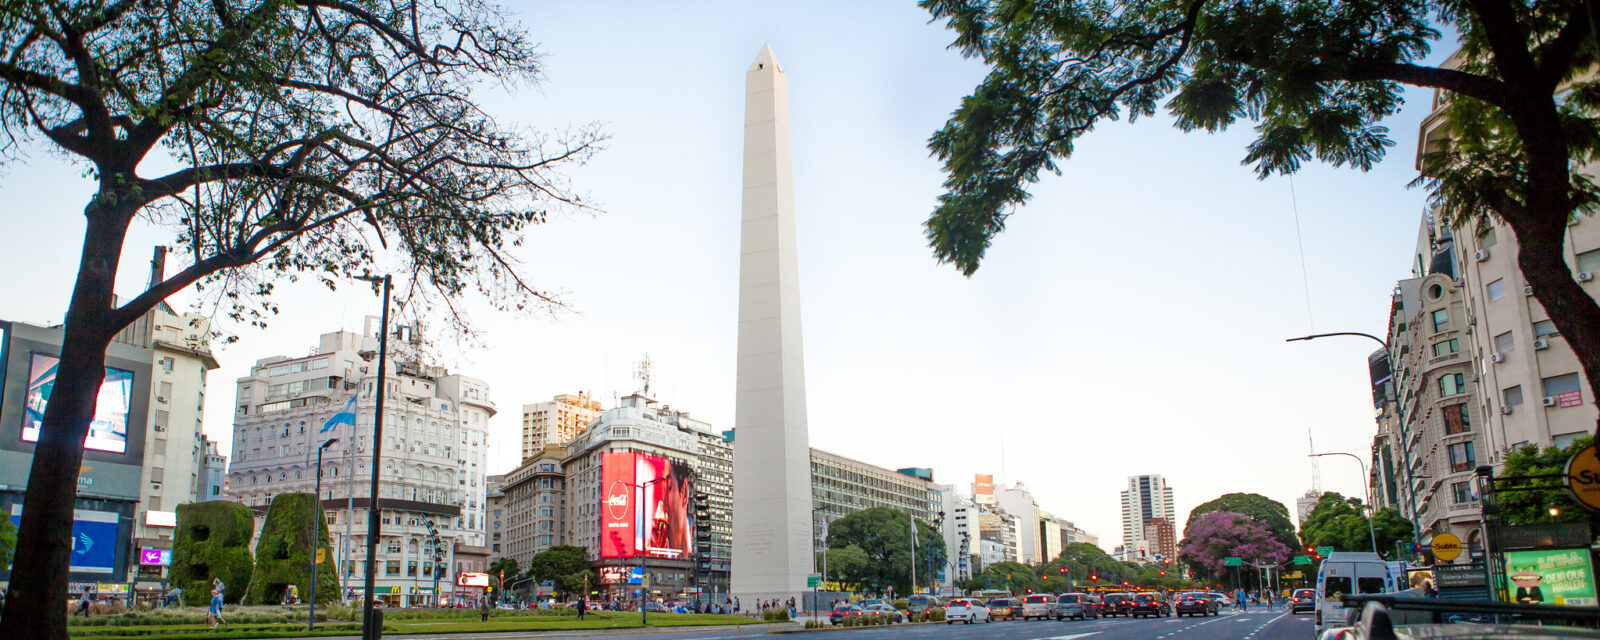 The Most Important Sculptures and Monuments To See in Buenos Aires